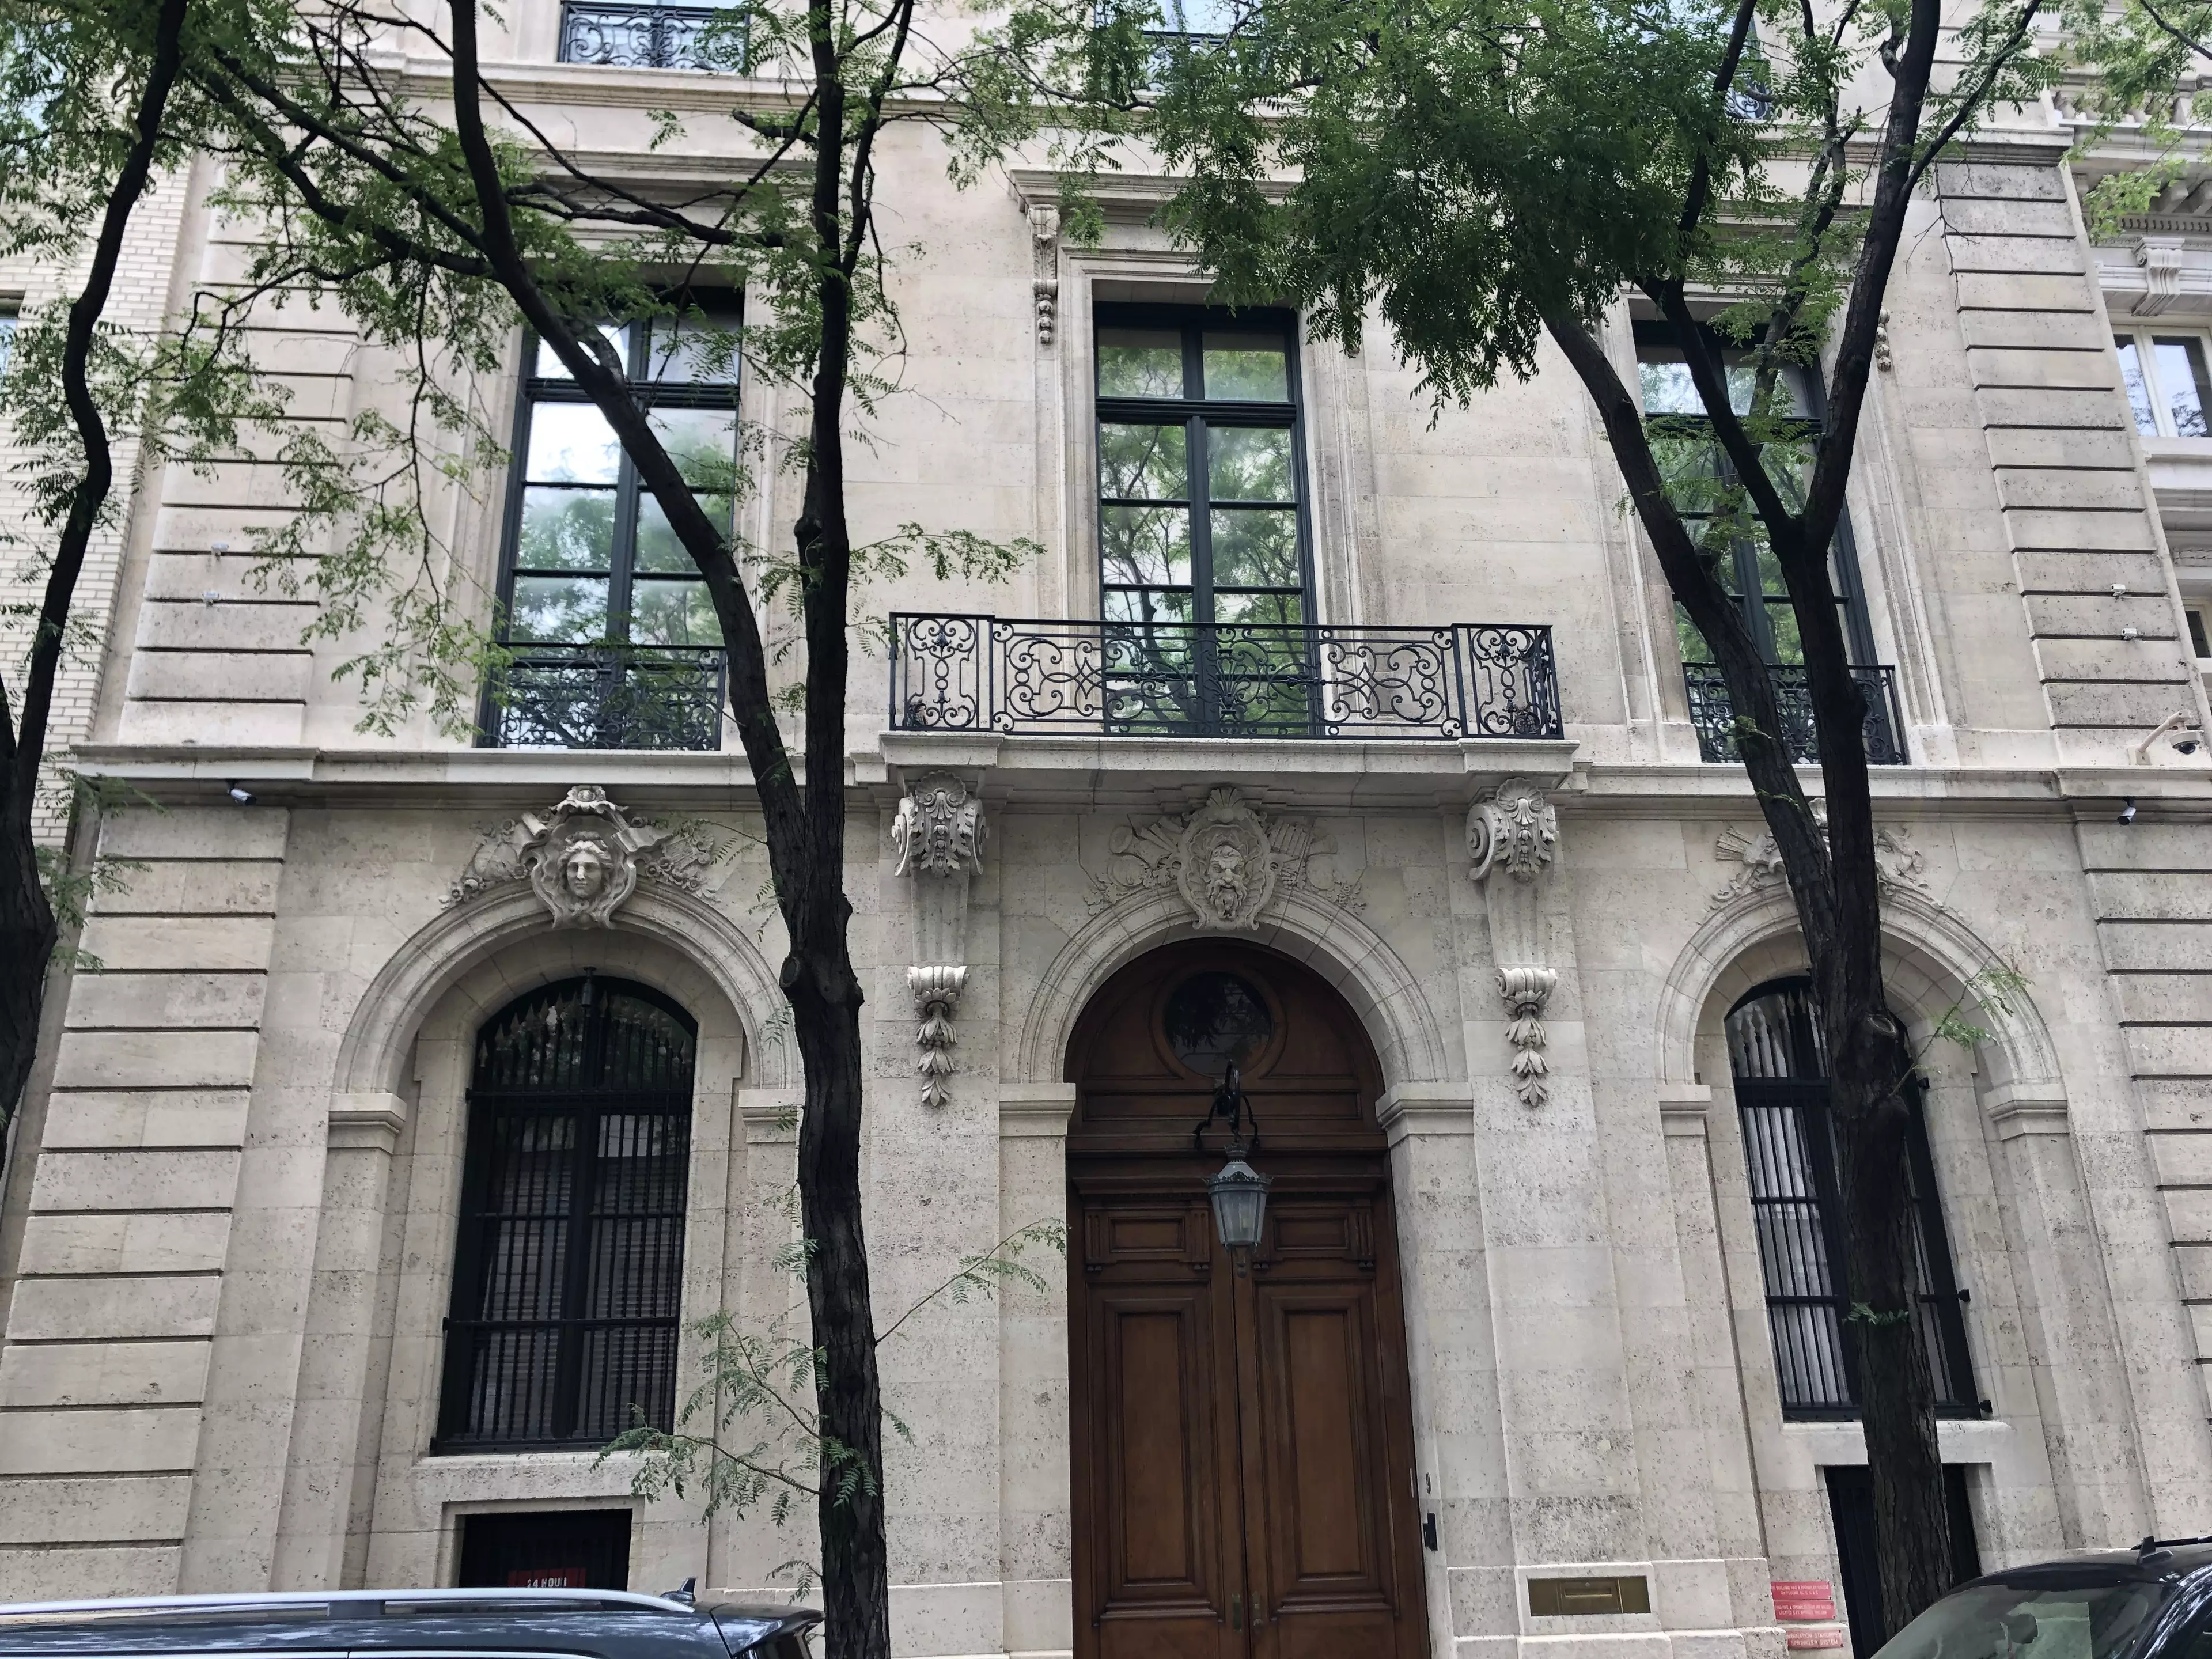 Epstein's New York mansion, where he is believed to have abused dozens of young girls (